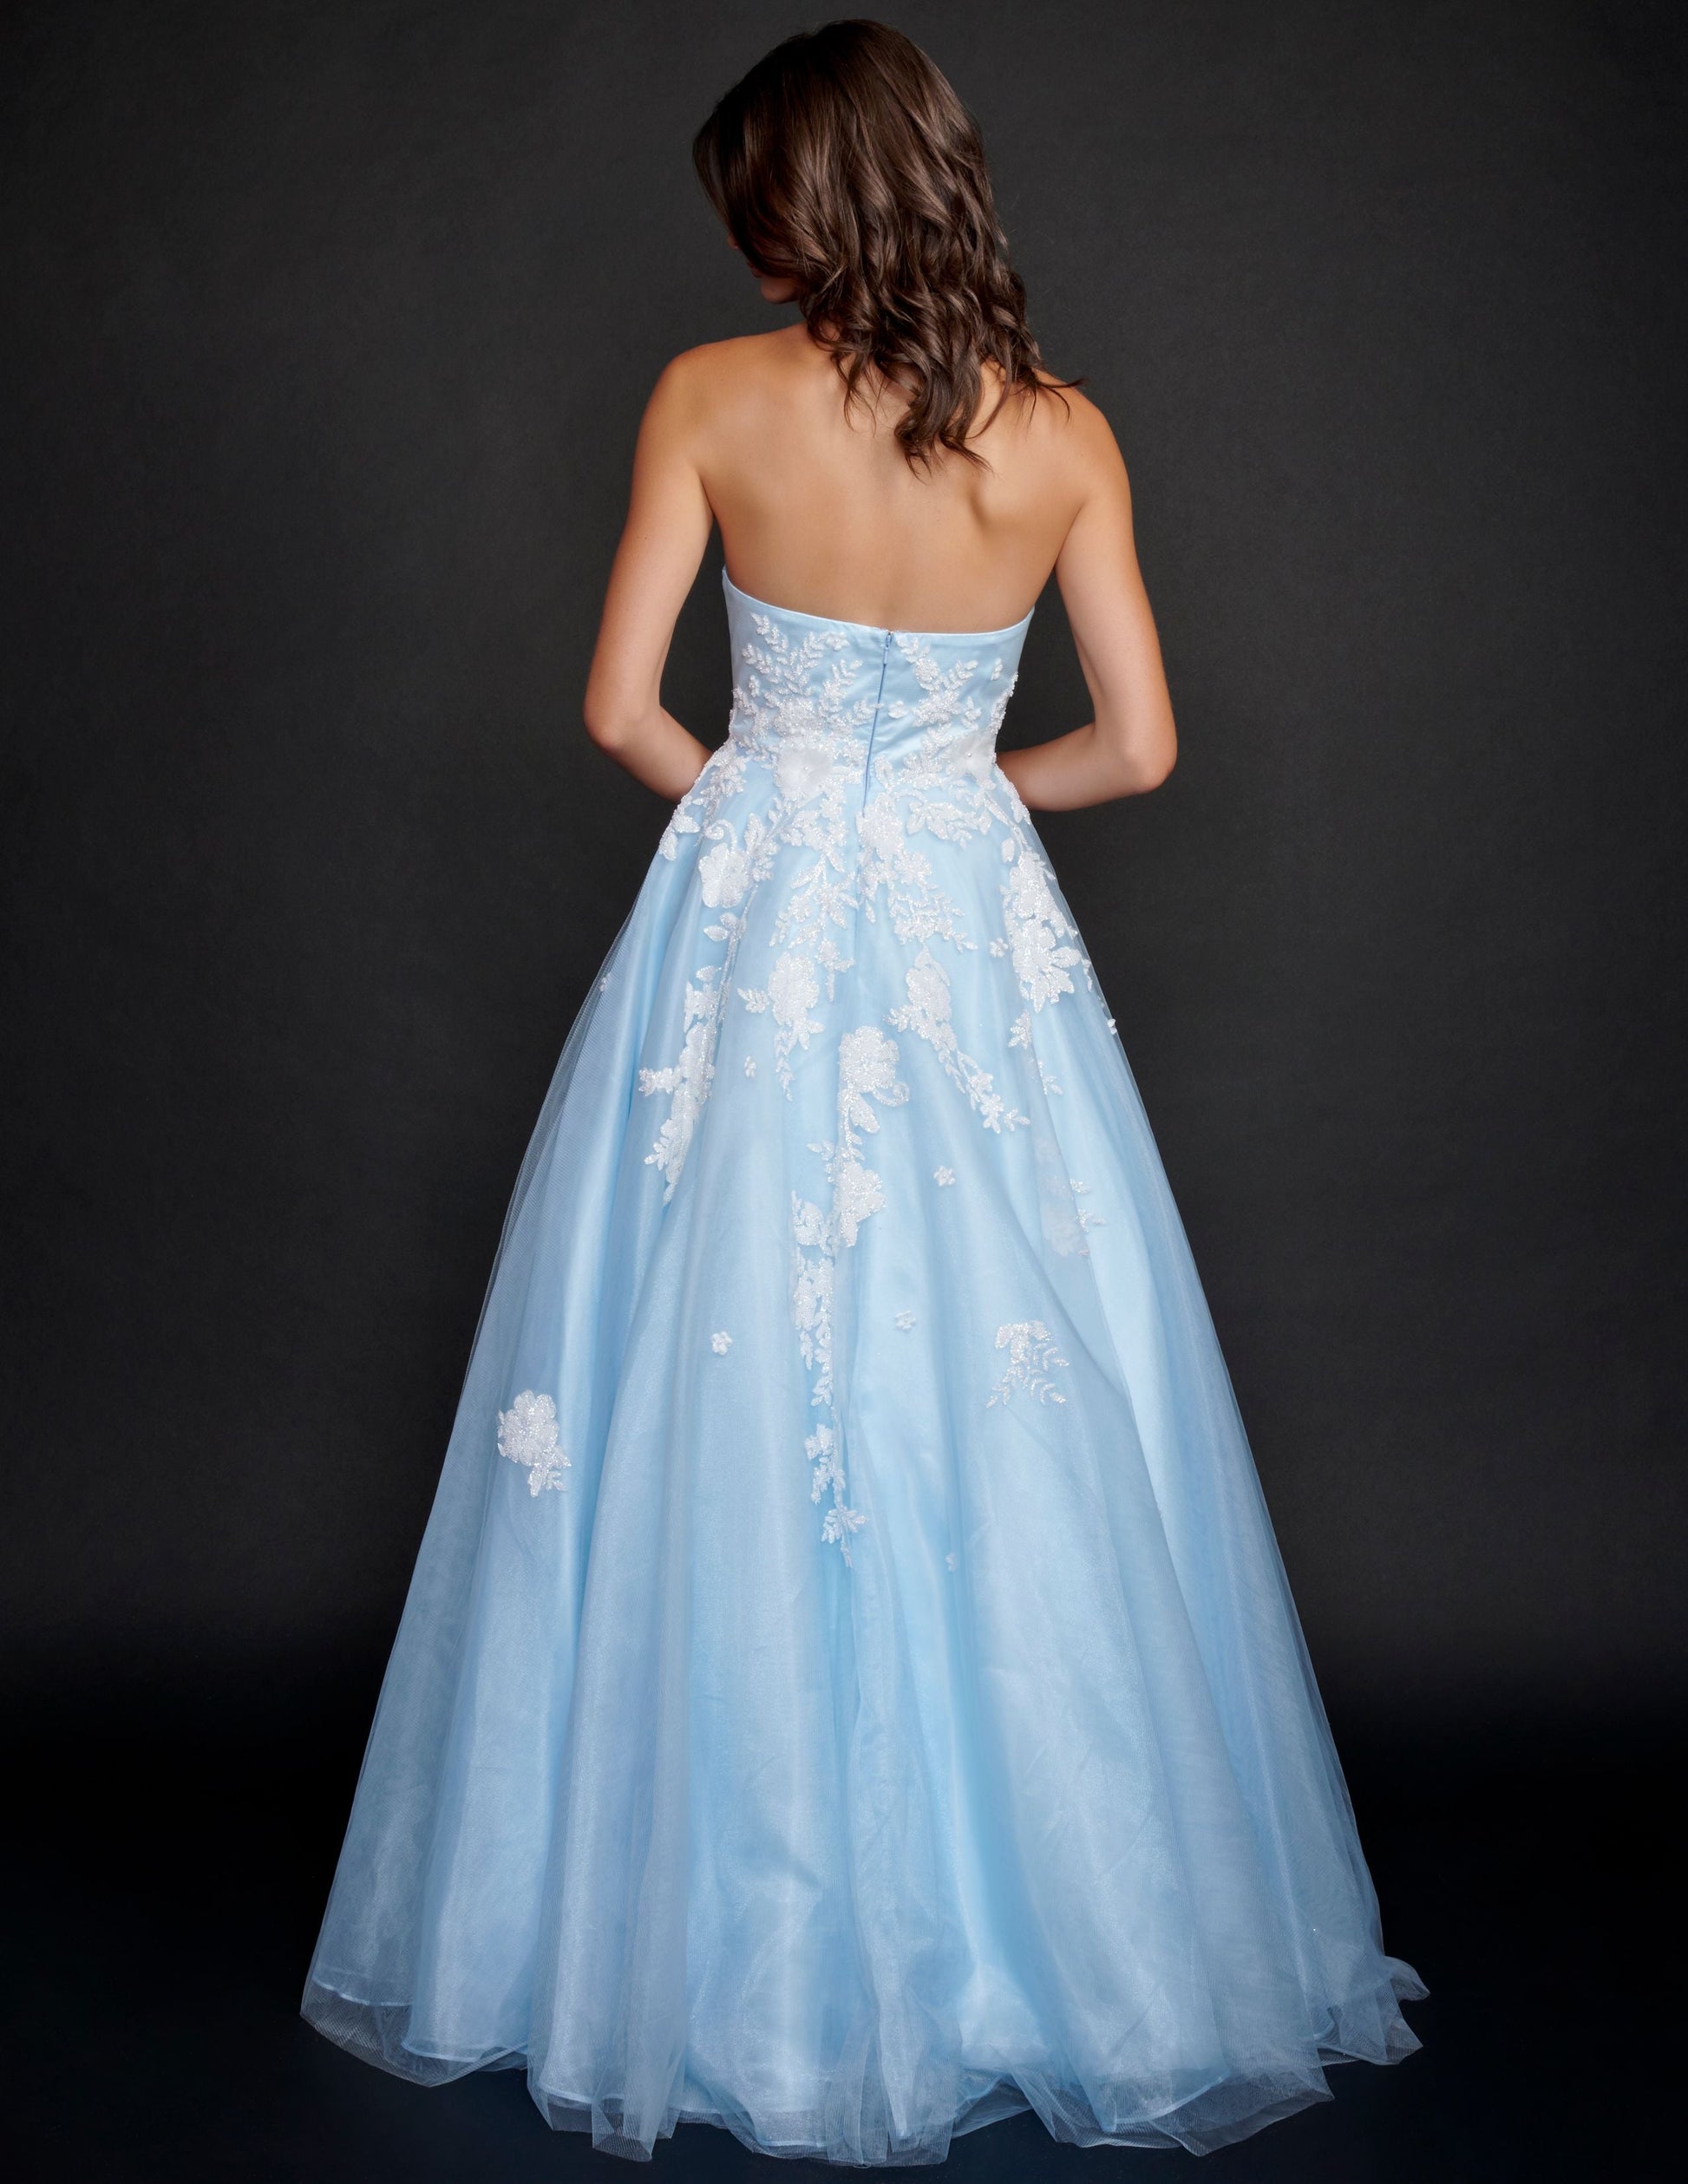 Nina Canacci 9137  This is a strapless ballgown with a sweetheart neckline and 3D floral appliques on the bodice and streaming down the dress. It is good for a Wedding dress or Prom Gown.   Available Size- 4-18  Available Color- Baby Blue, Ivory